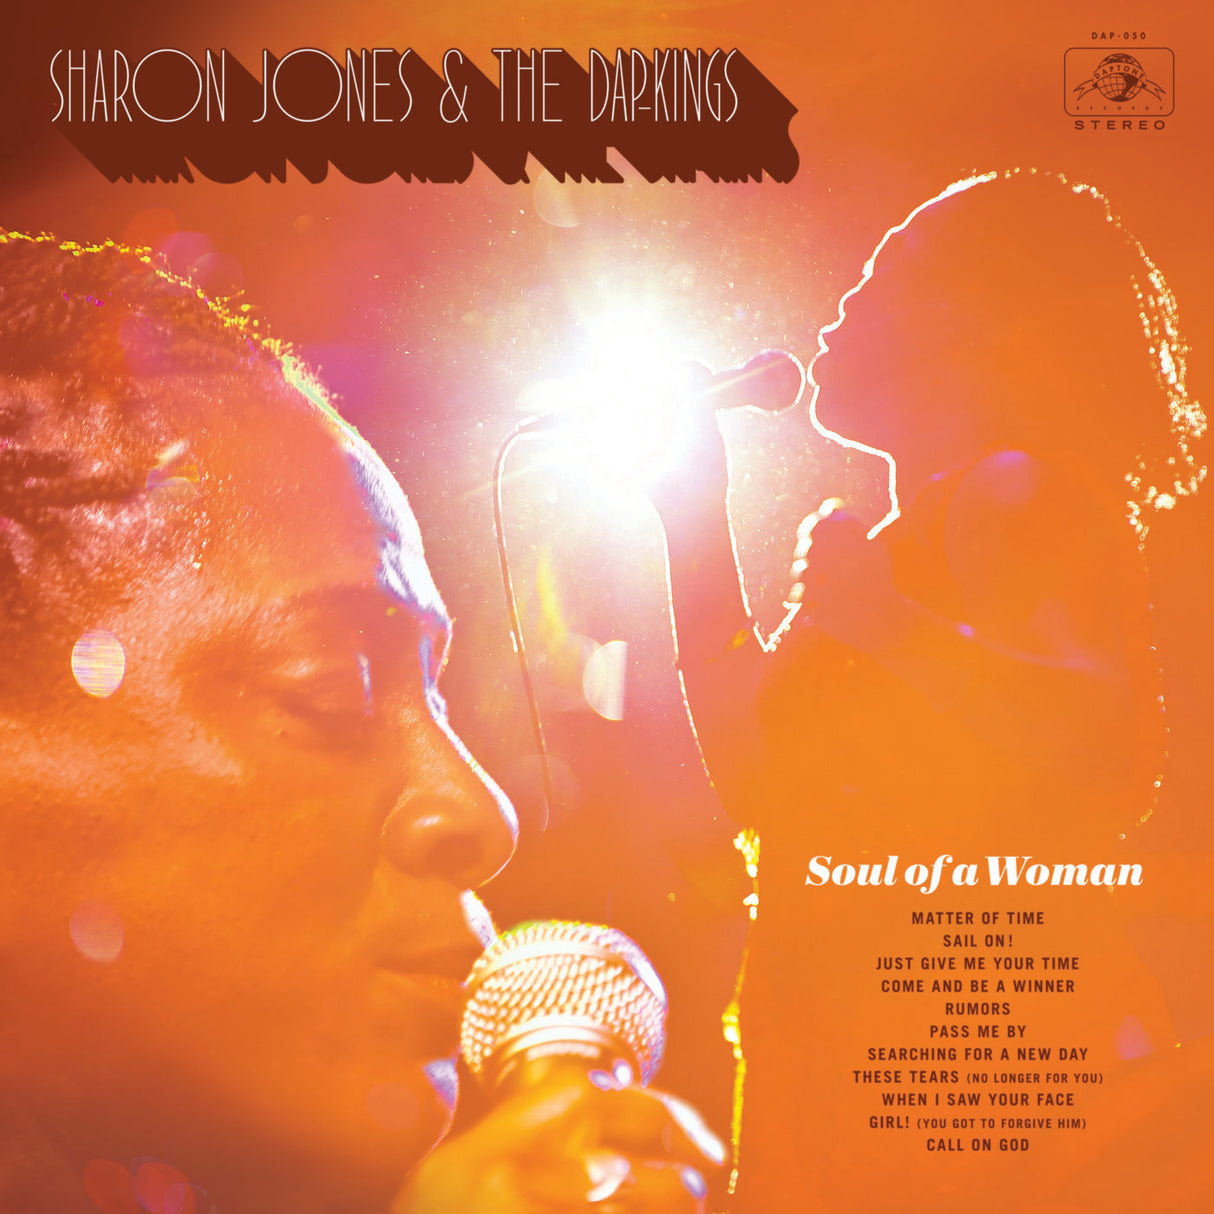 Sharon Jones & The Dap-Kings Soul of a Woman / Give The People What They Want / I Learned The Hard Way (3 CD Set) CD